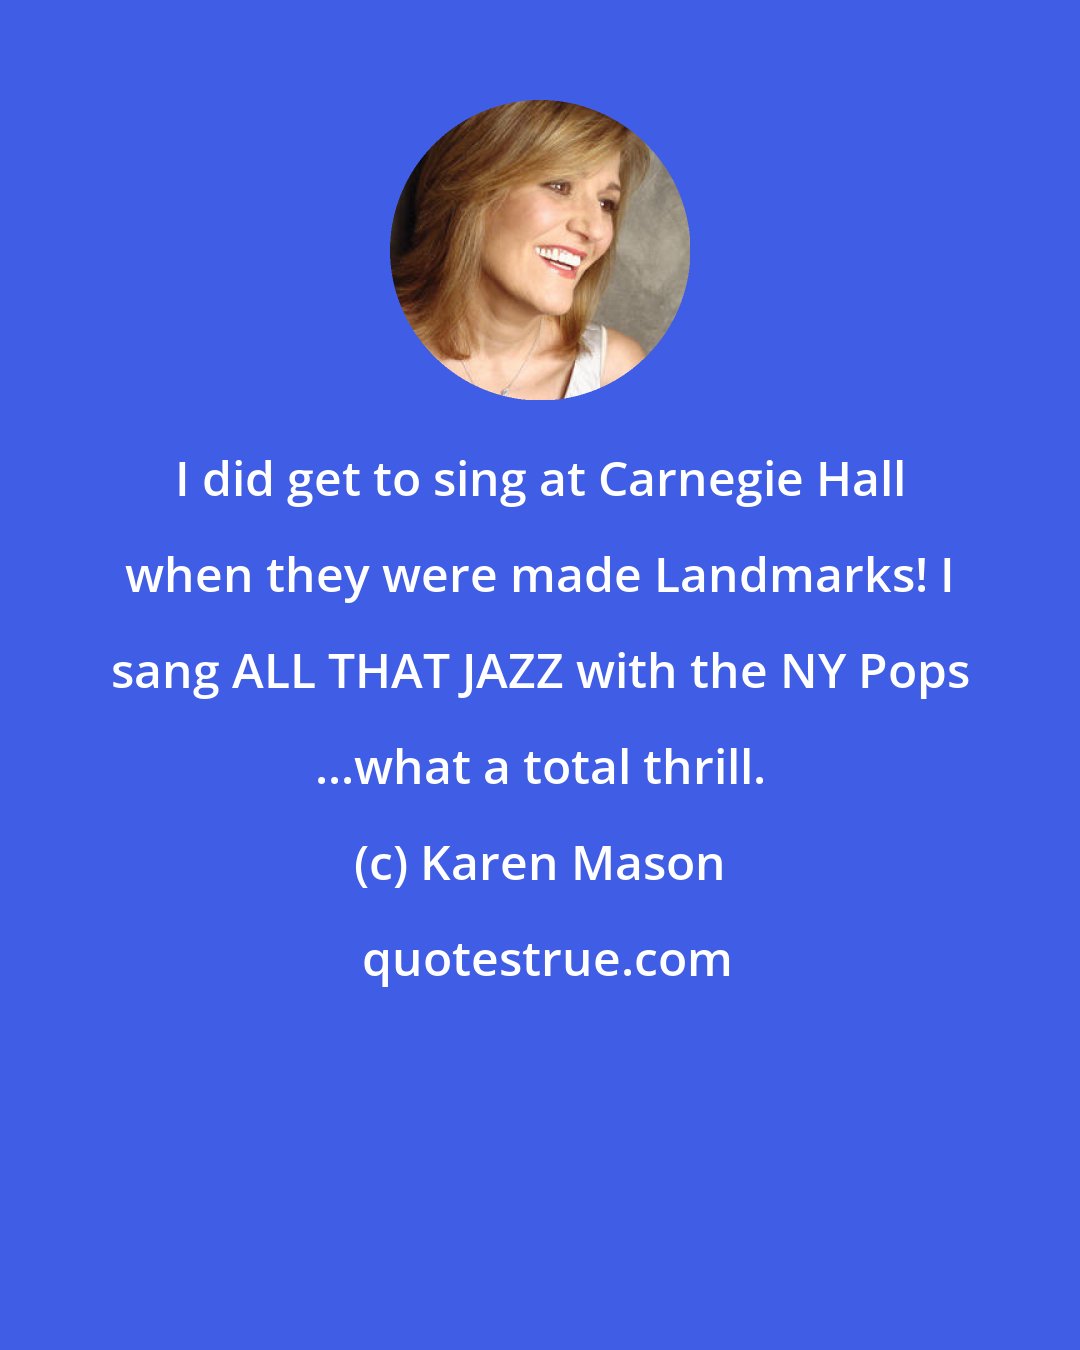 Karen Mason: I did get to sing at Carnegie Hall when they were made Landmarks! I sang ALL THAT JAZZ with the NY Pops ...what a total thrill.